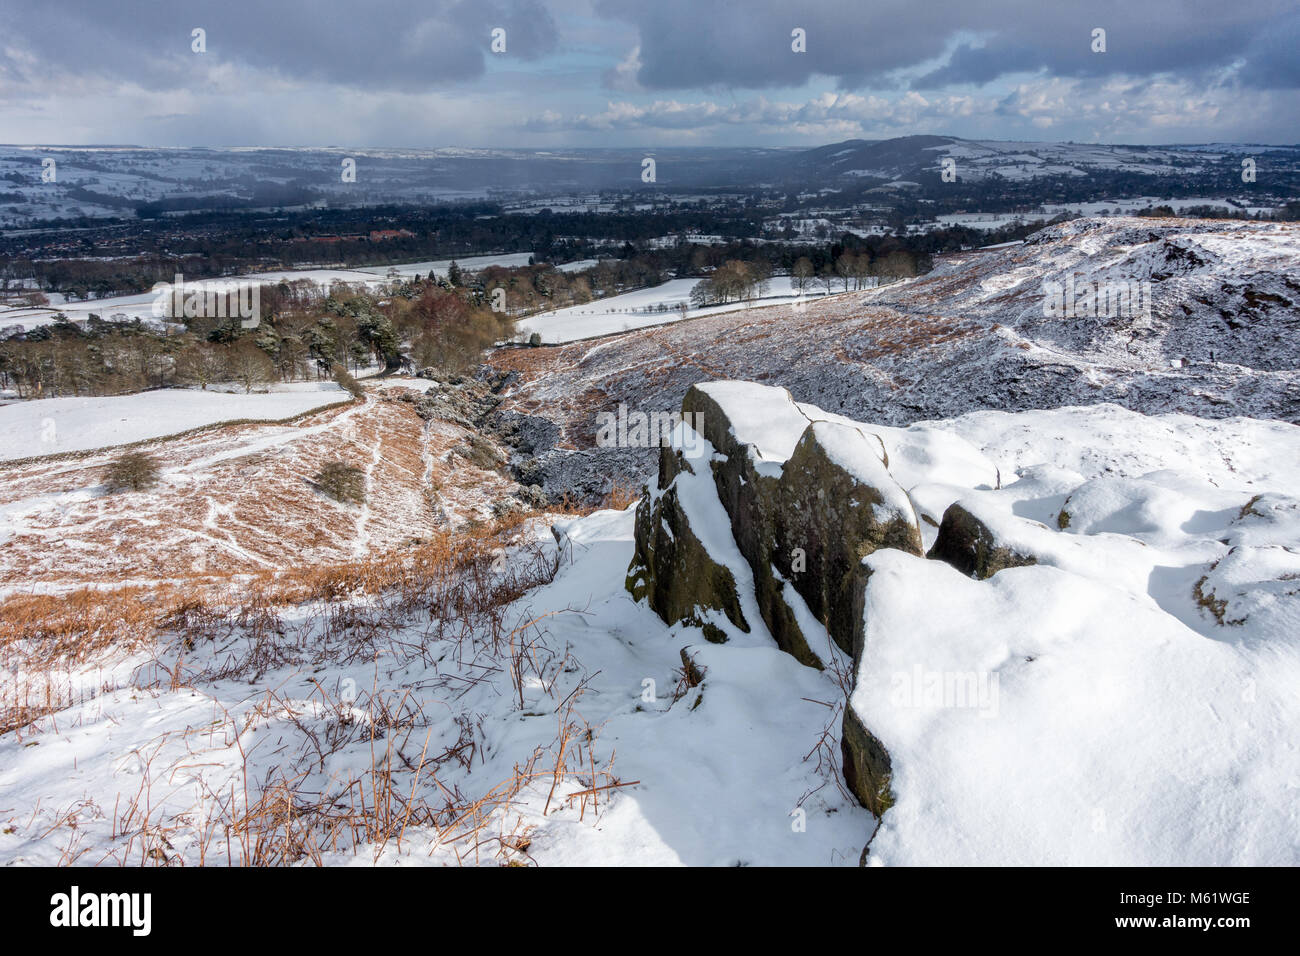 Looking over the Wharfedale valley from Ilkley Moor with The Chevin on the right and Burley-in-Wharfedale below and Otley behind on a snowy day in win Stock Photo